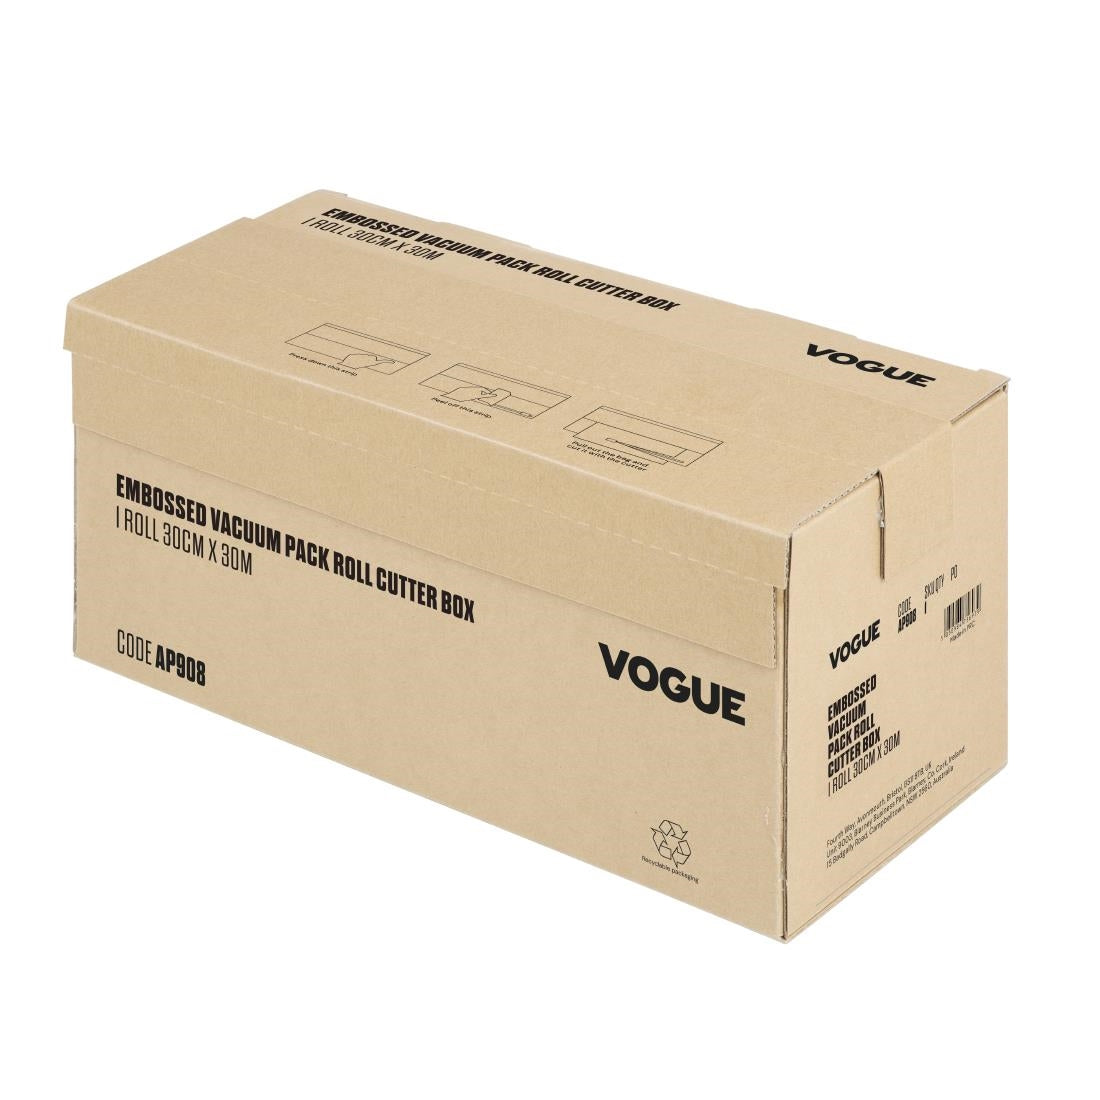 AP908 Vogue Vacuum Pack Roll with Cutter Box (Embossed) 300mm width